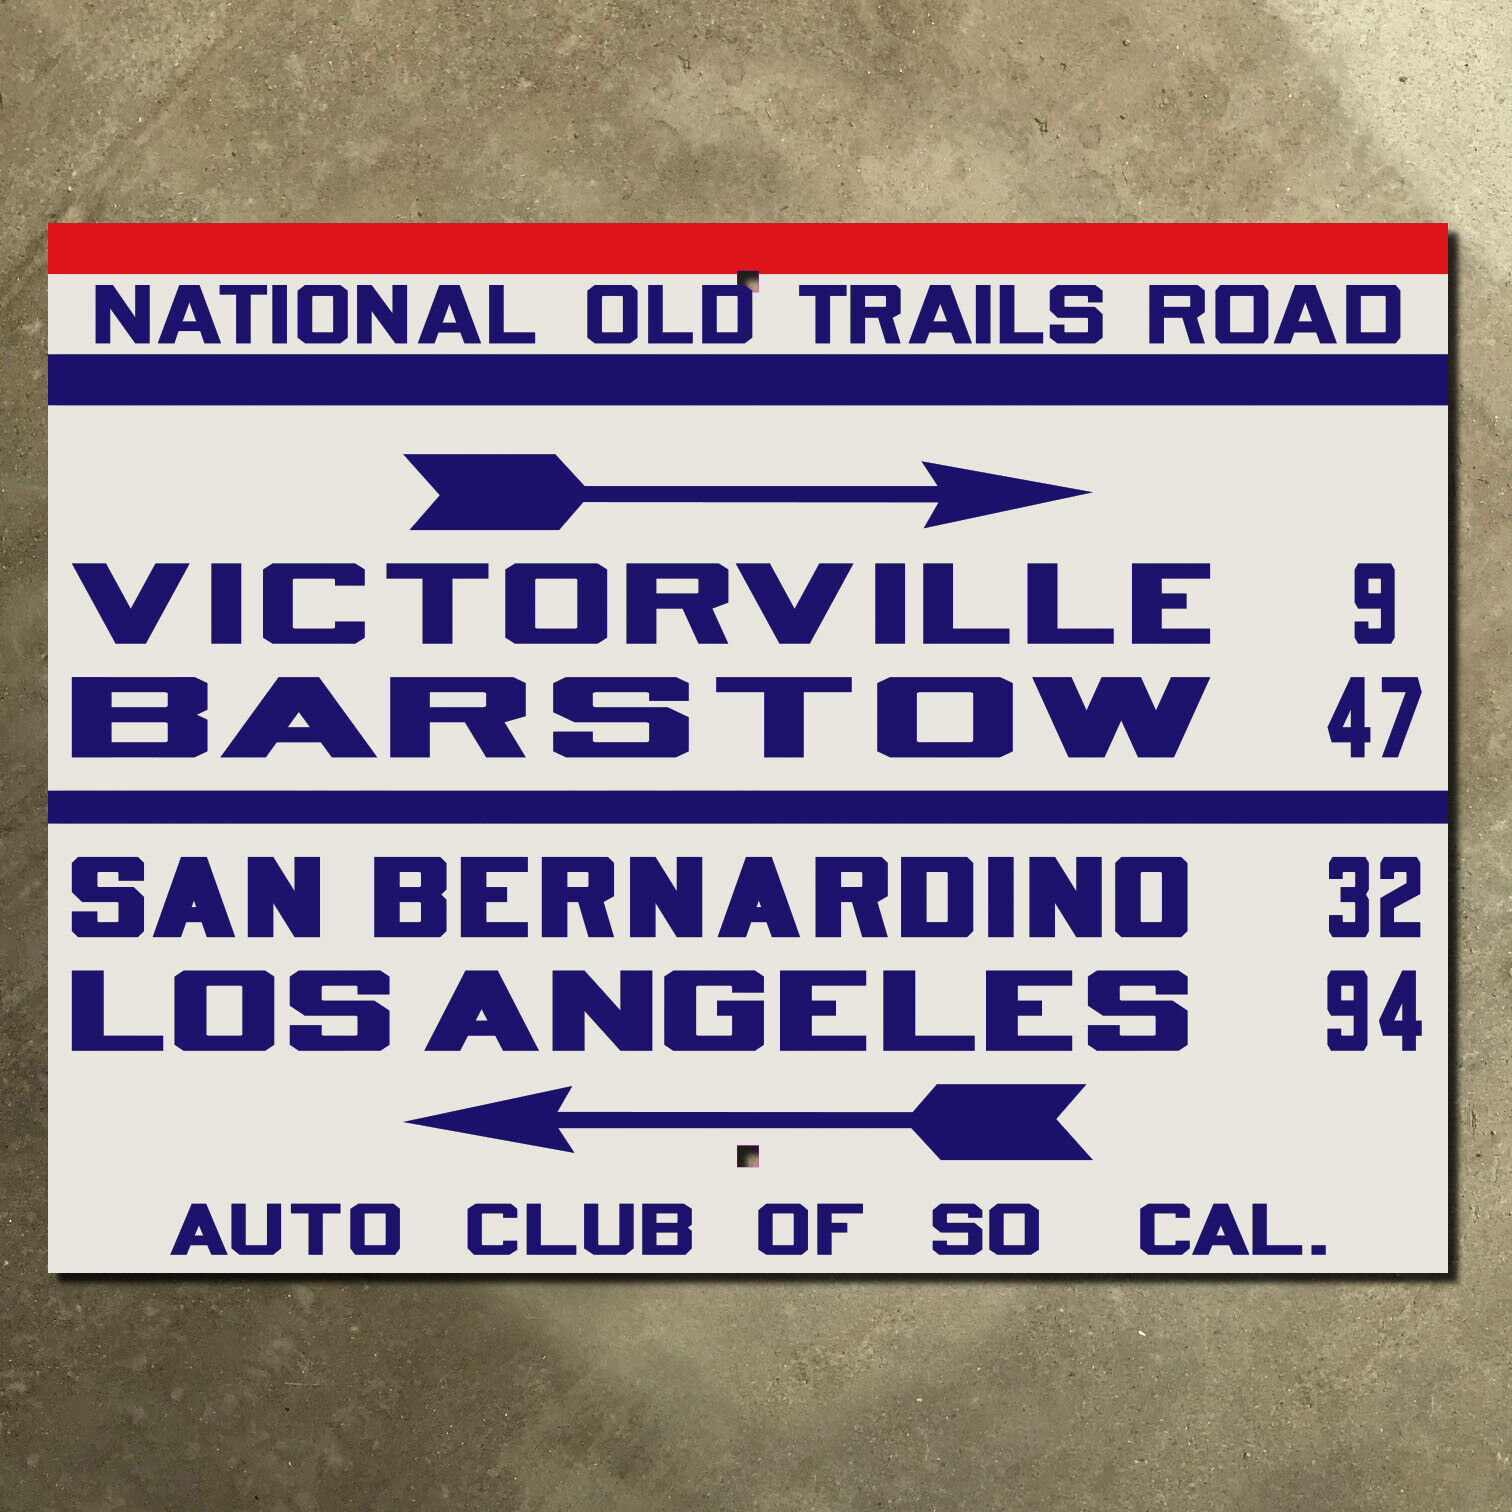 ACSC Victorville Barstow National Old Trails Road route 66 highway sign 12x9